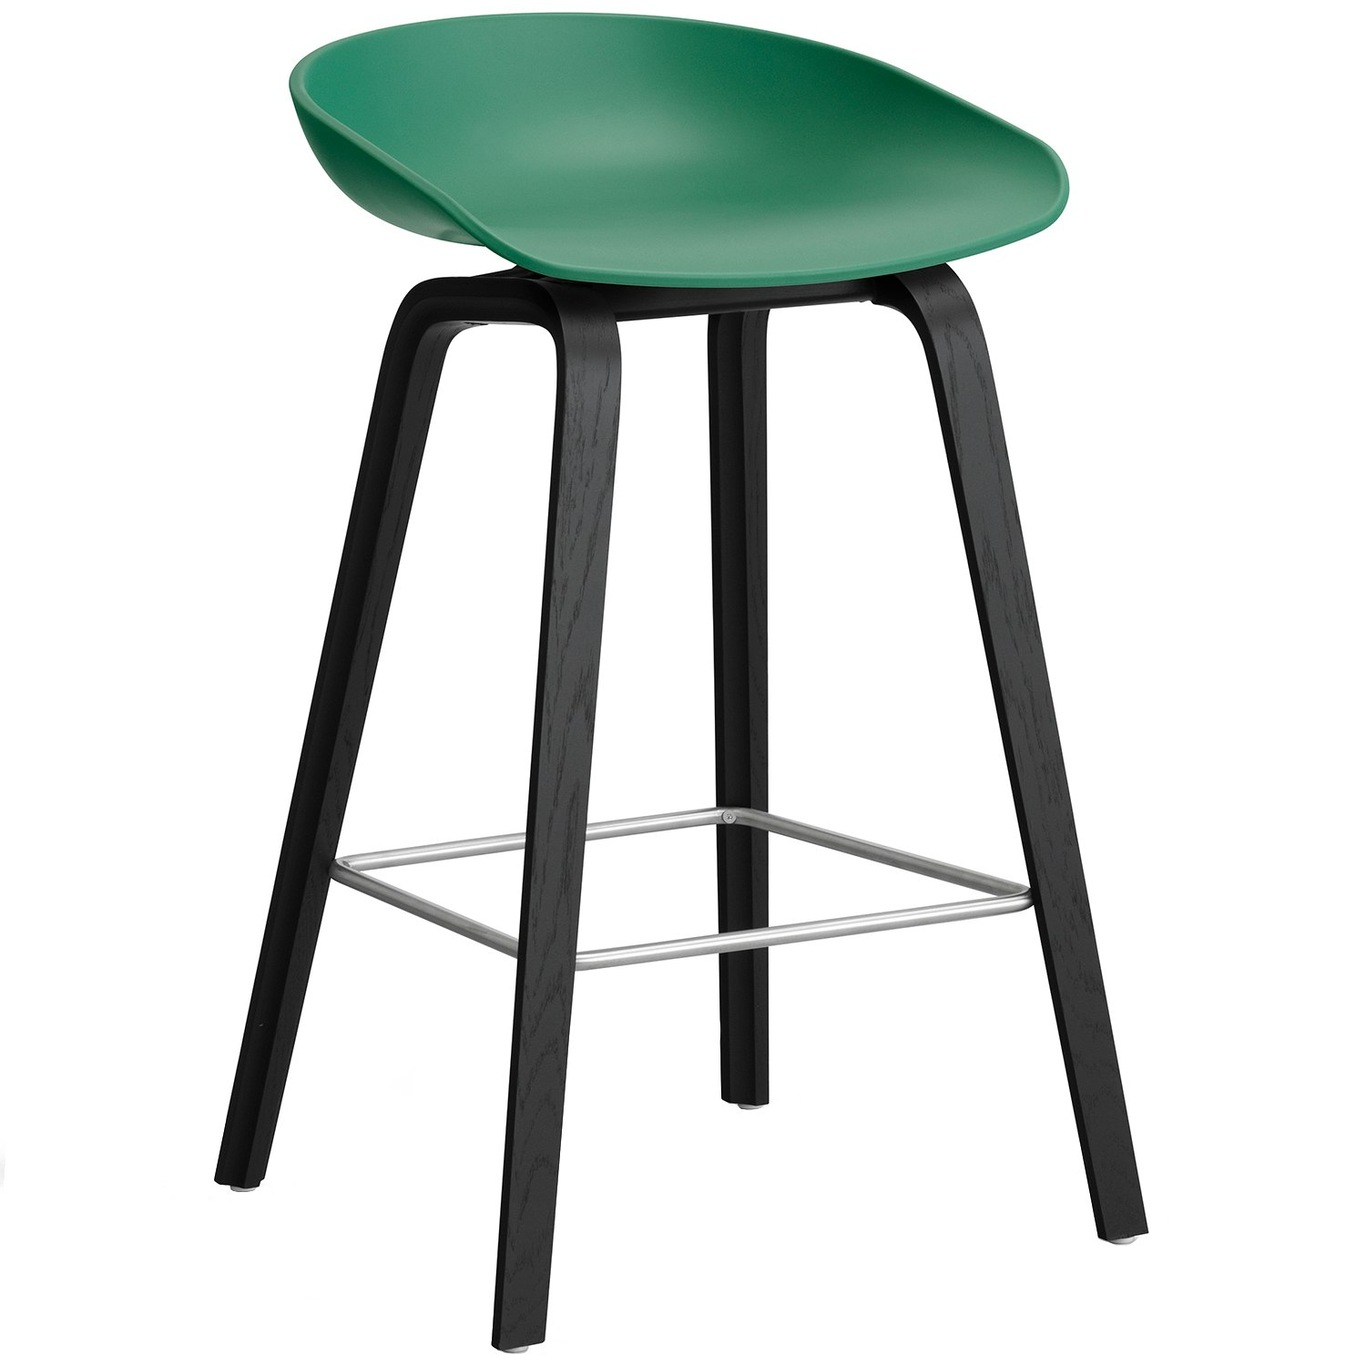 AAS 32 2.0 Bar Stool 65 cm, Black Lacquered Oak / Teal Green